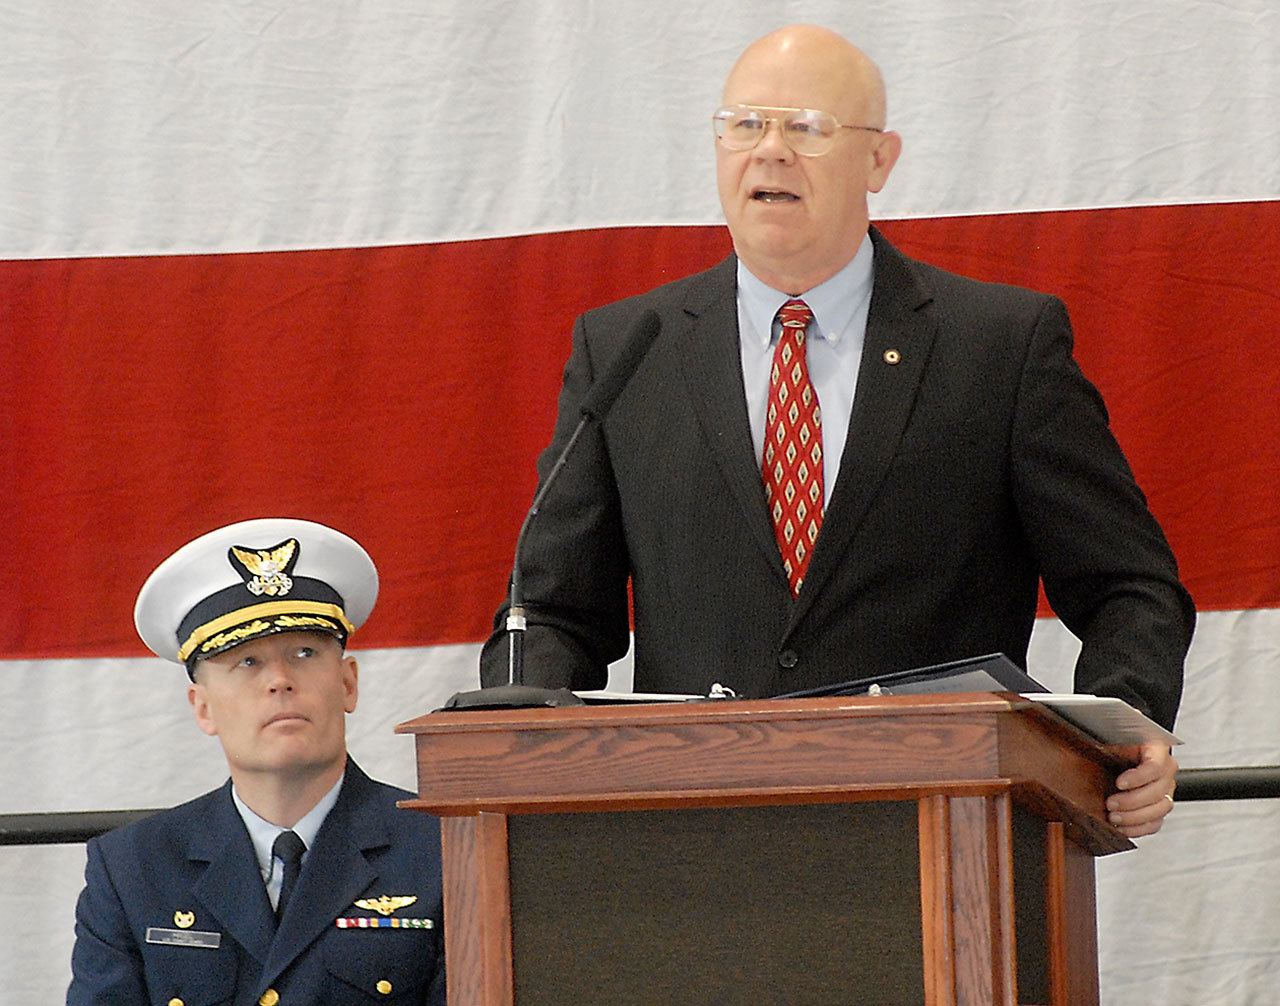 Retired U.S. Coast Guard Rear Adm. Richard Gromlich, right, delivers the keynote address during Friday’s Veterans Day ceremony in the hangar of U.S. Coast Guard Air Station/Sector Field Office Port Angeles. Looking on at left is Cmdr. Mark Hiigel, commanding officer of the station. (Keith Thorpe/Peninsula Daily News)